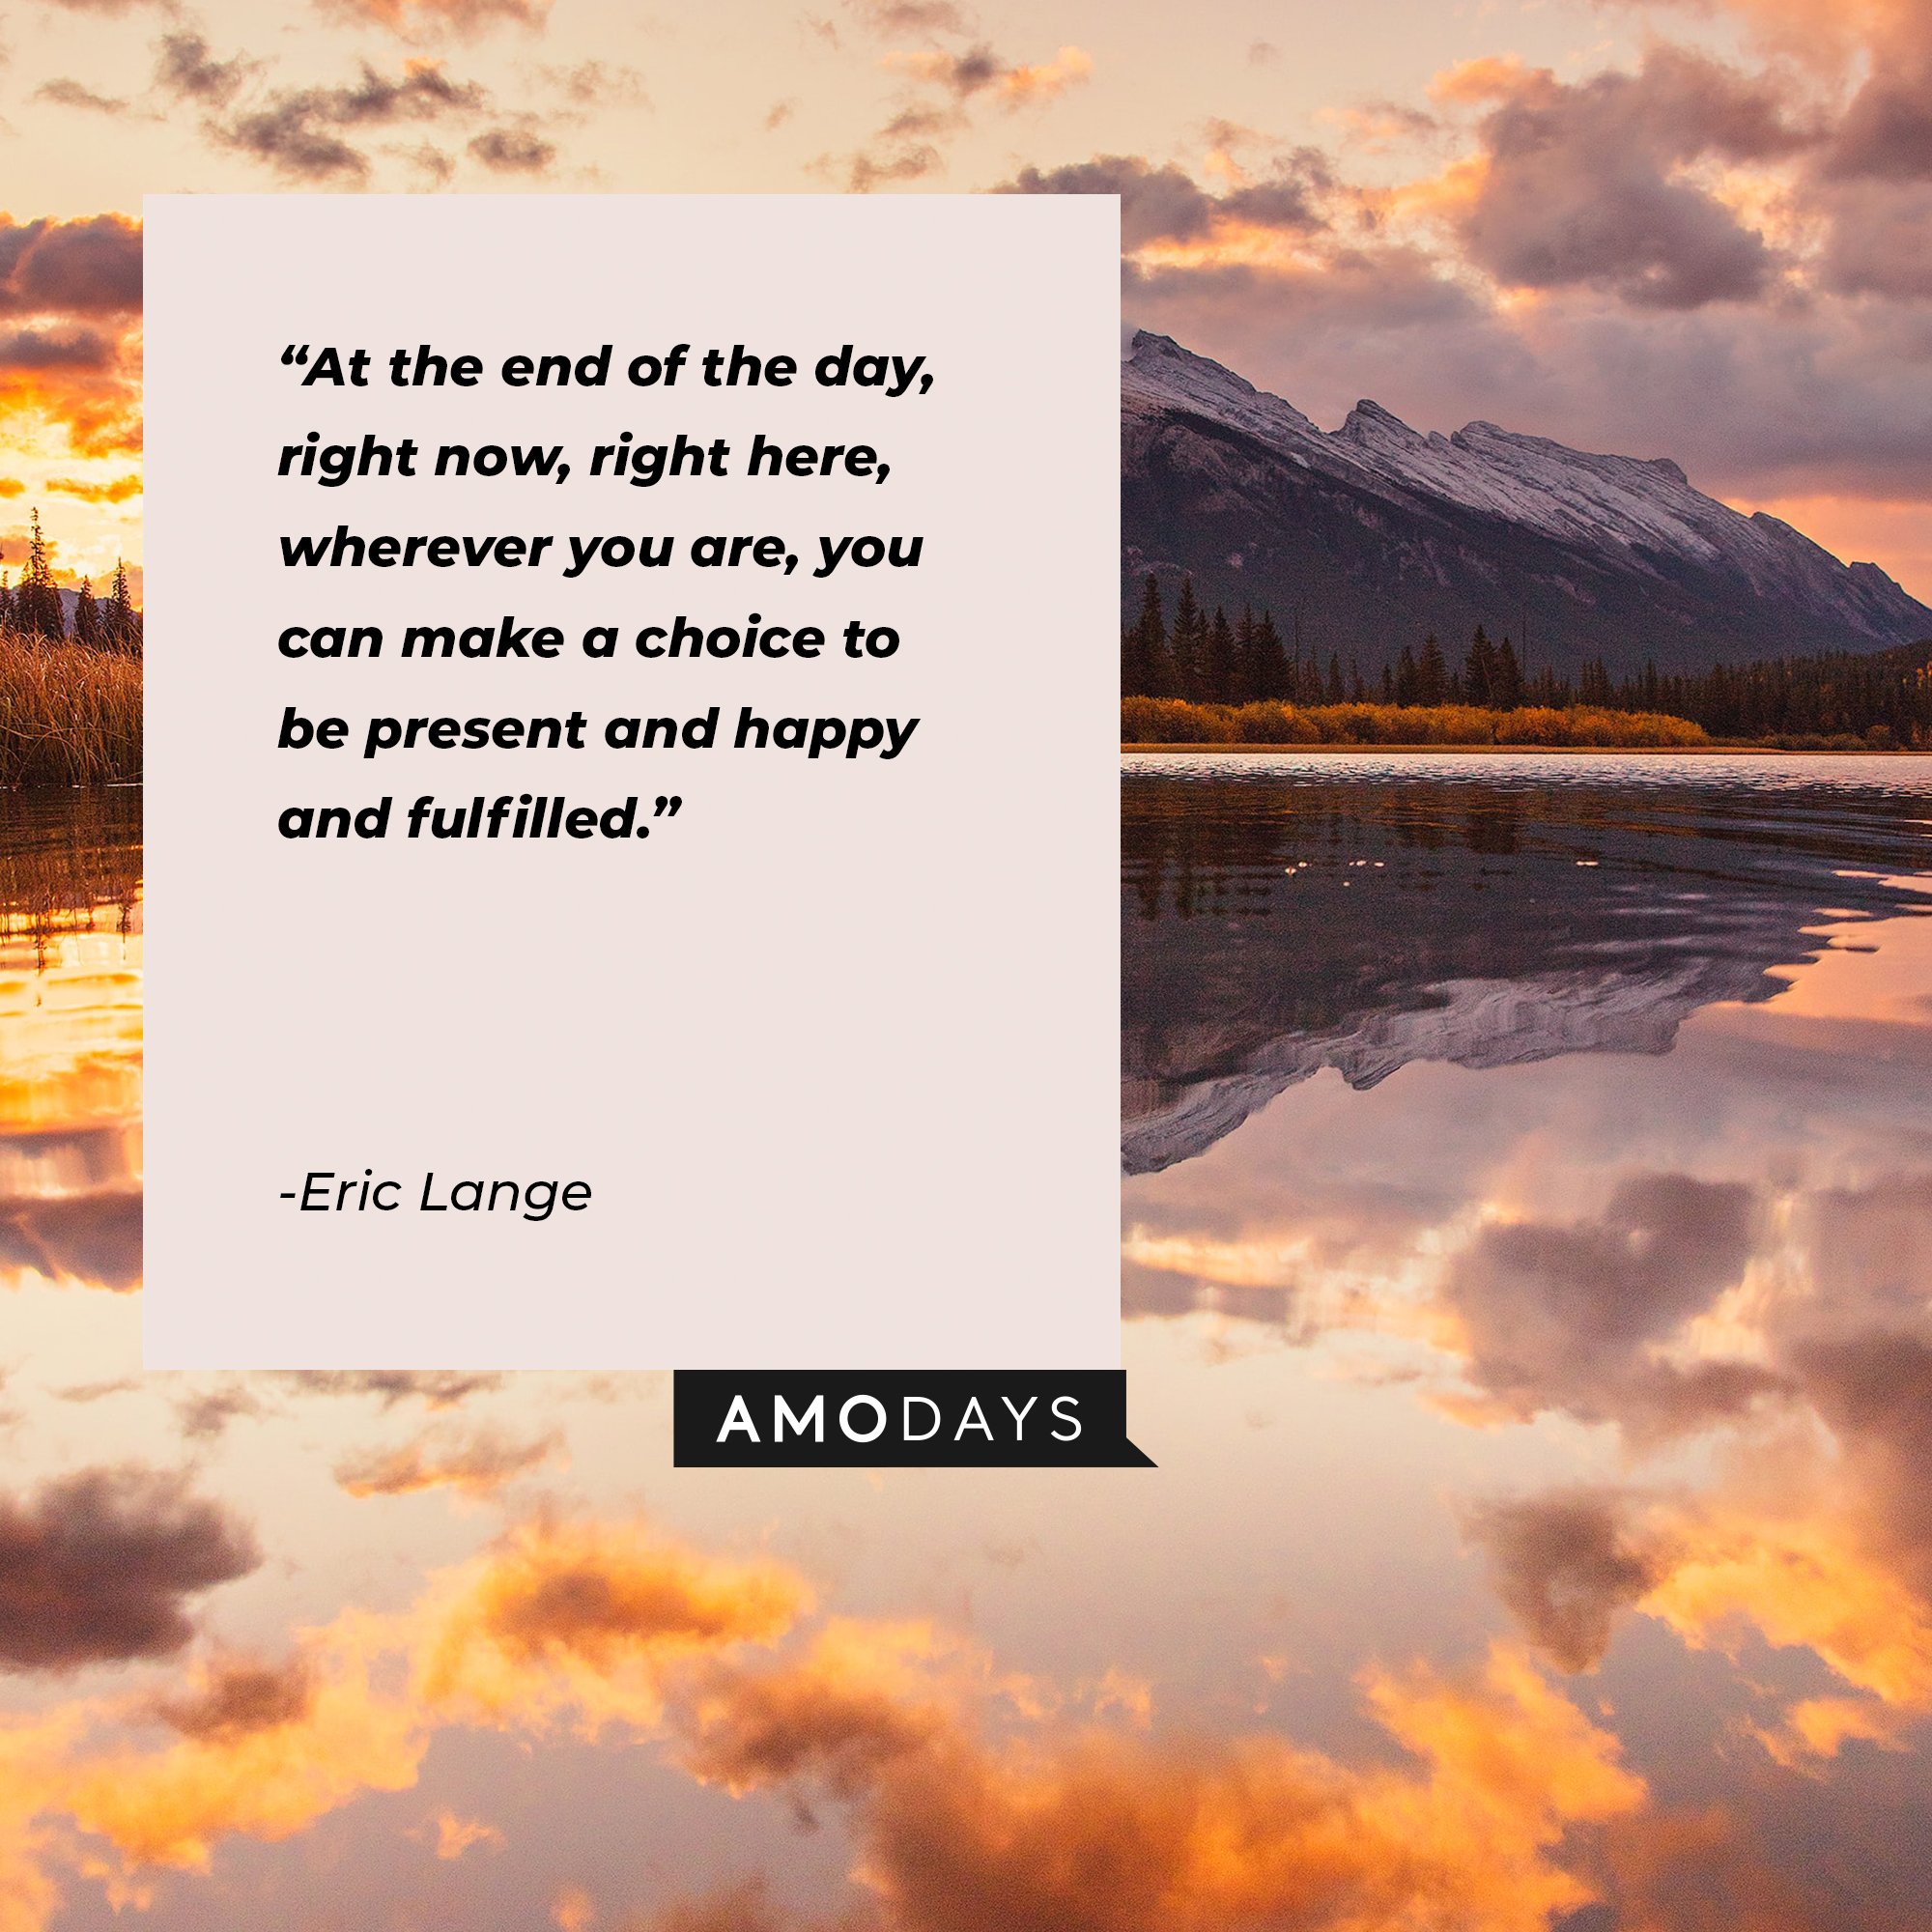 Eric Lange’s quote: “At the end of the day, right now, right here, wherever you are, you can make a choice to be present and happy and fulfilled.” | Image: AmoDays   